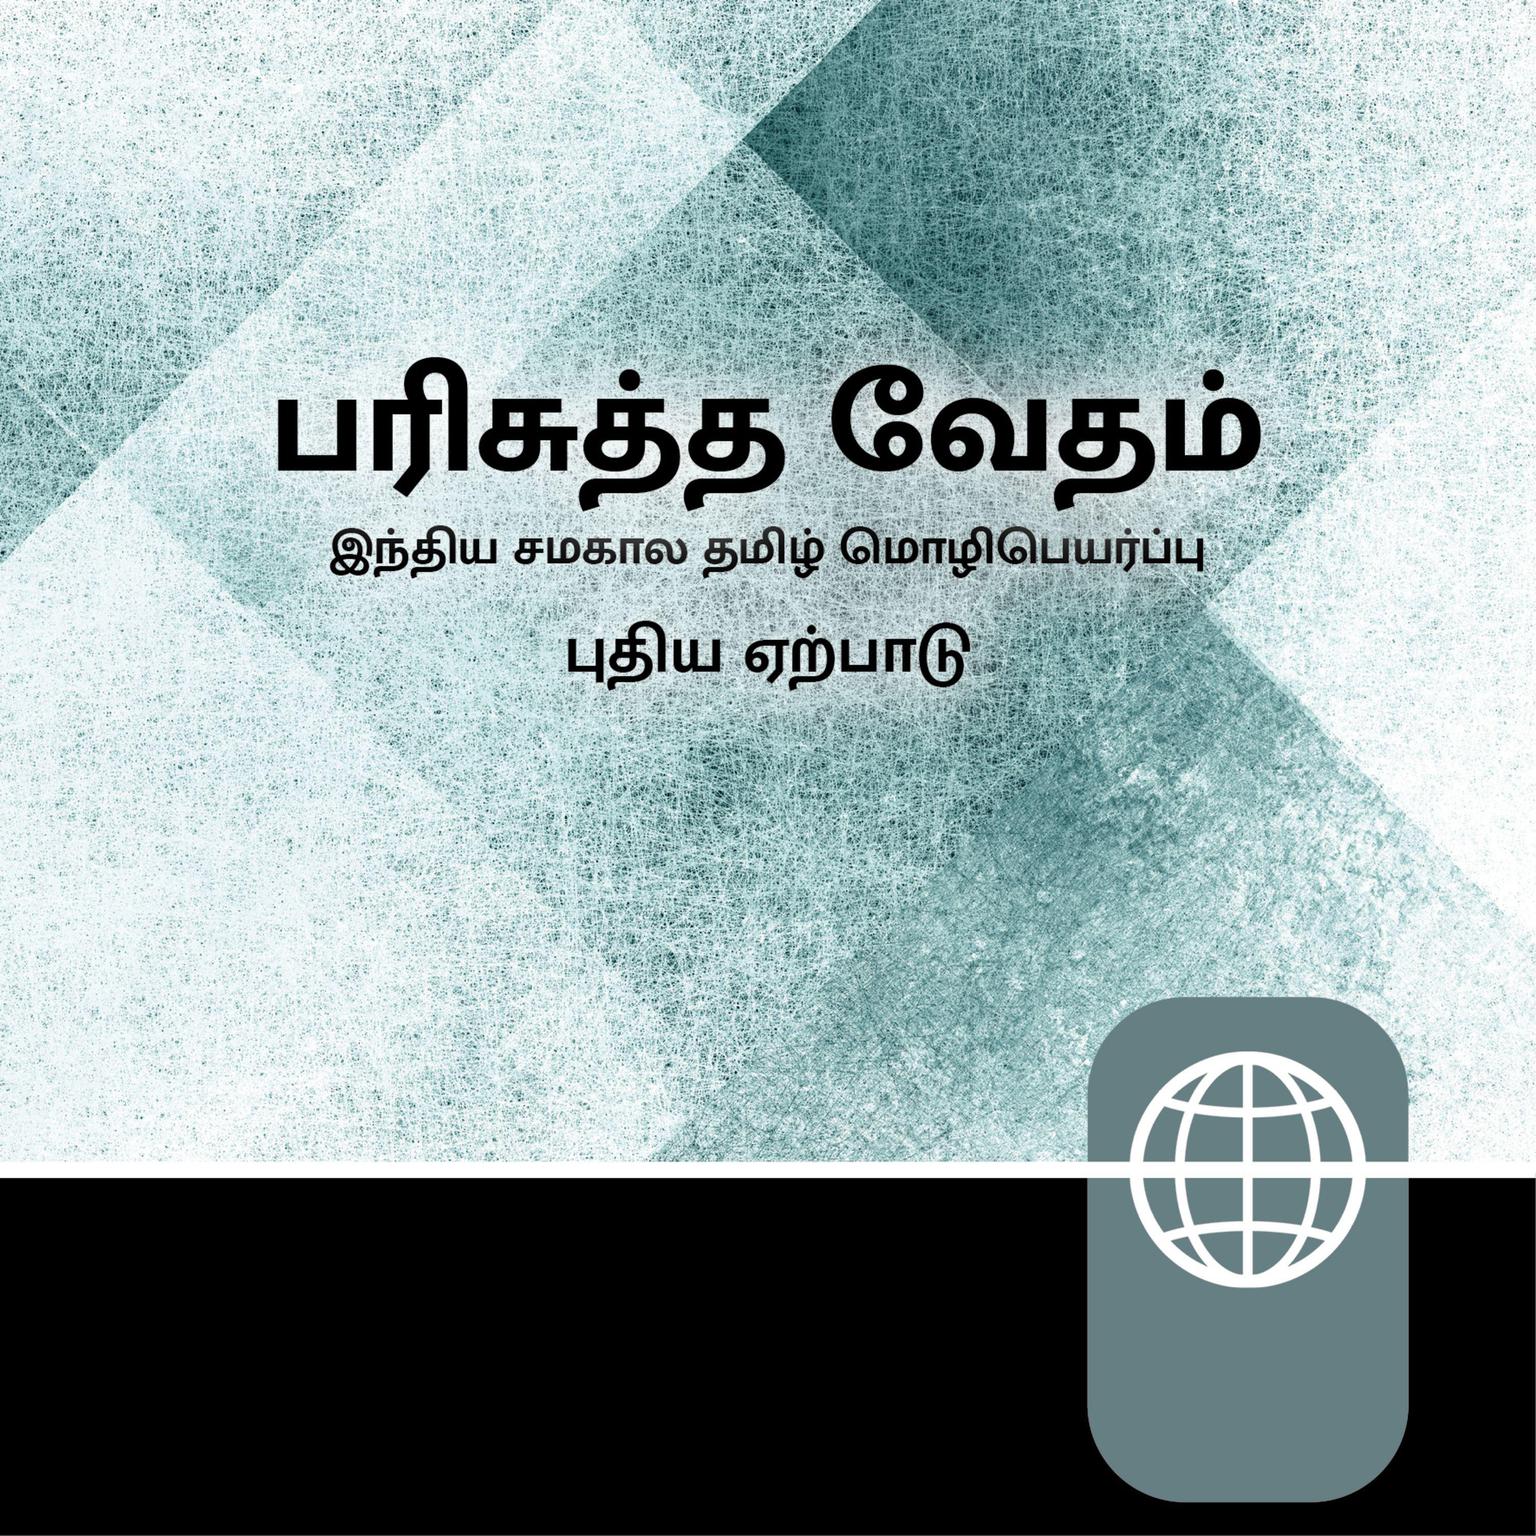 Tamil, Indian Audio New Testament – Indian Tamil Contemporary Version Audiobook, by Zondervan